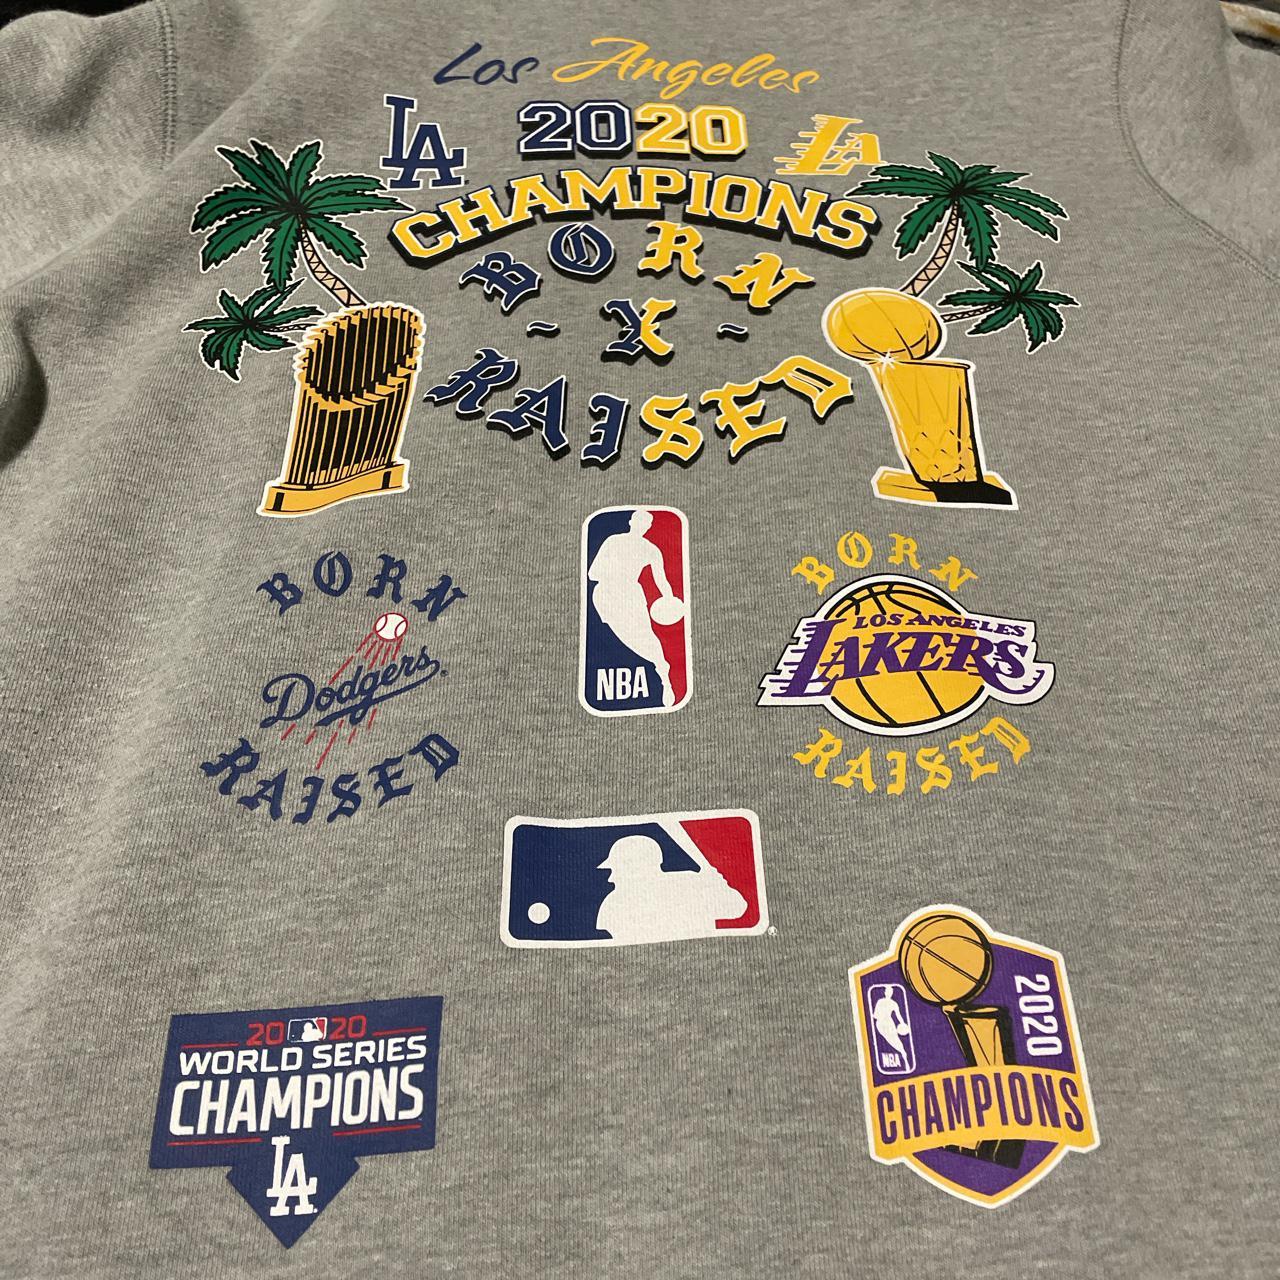 Born x Raised Launches LA Dodgers and Lakers 2020 Champions